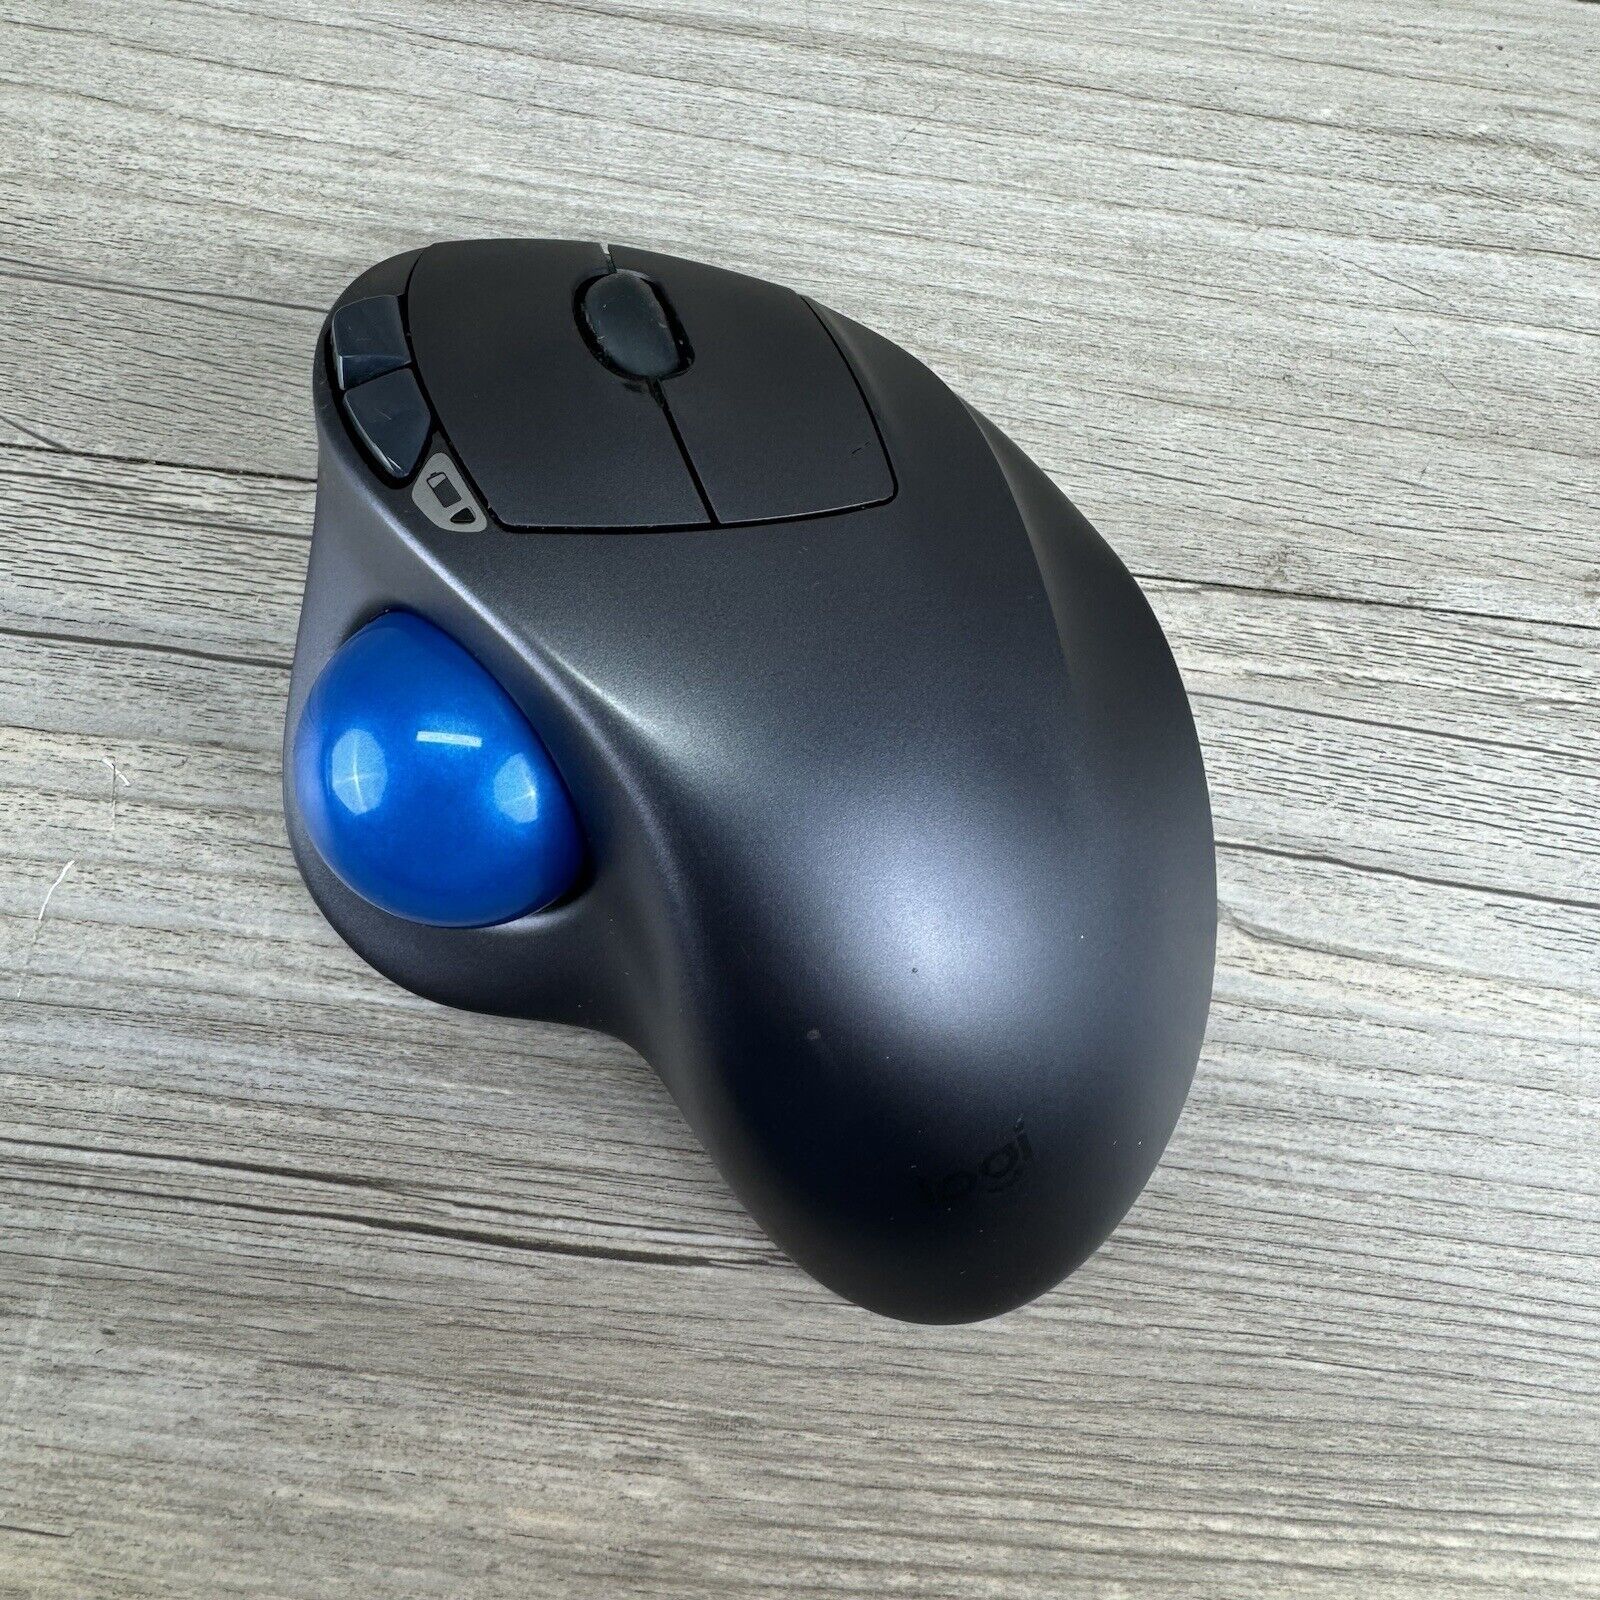 Logitech M570 Wireless Trackball Mouse With Dongle Tested Works Great